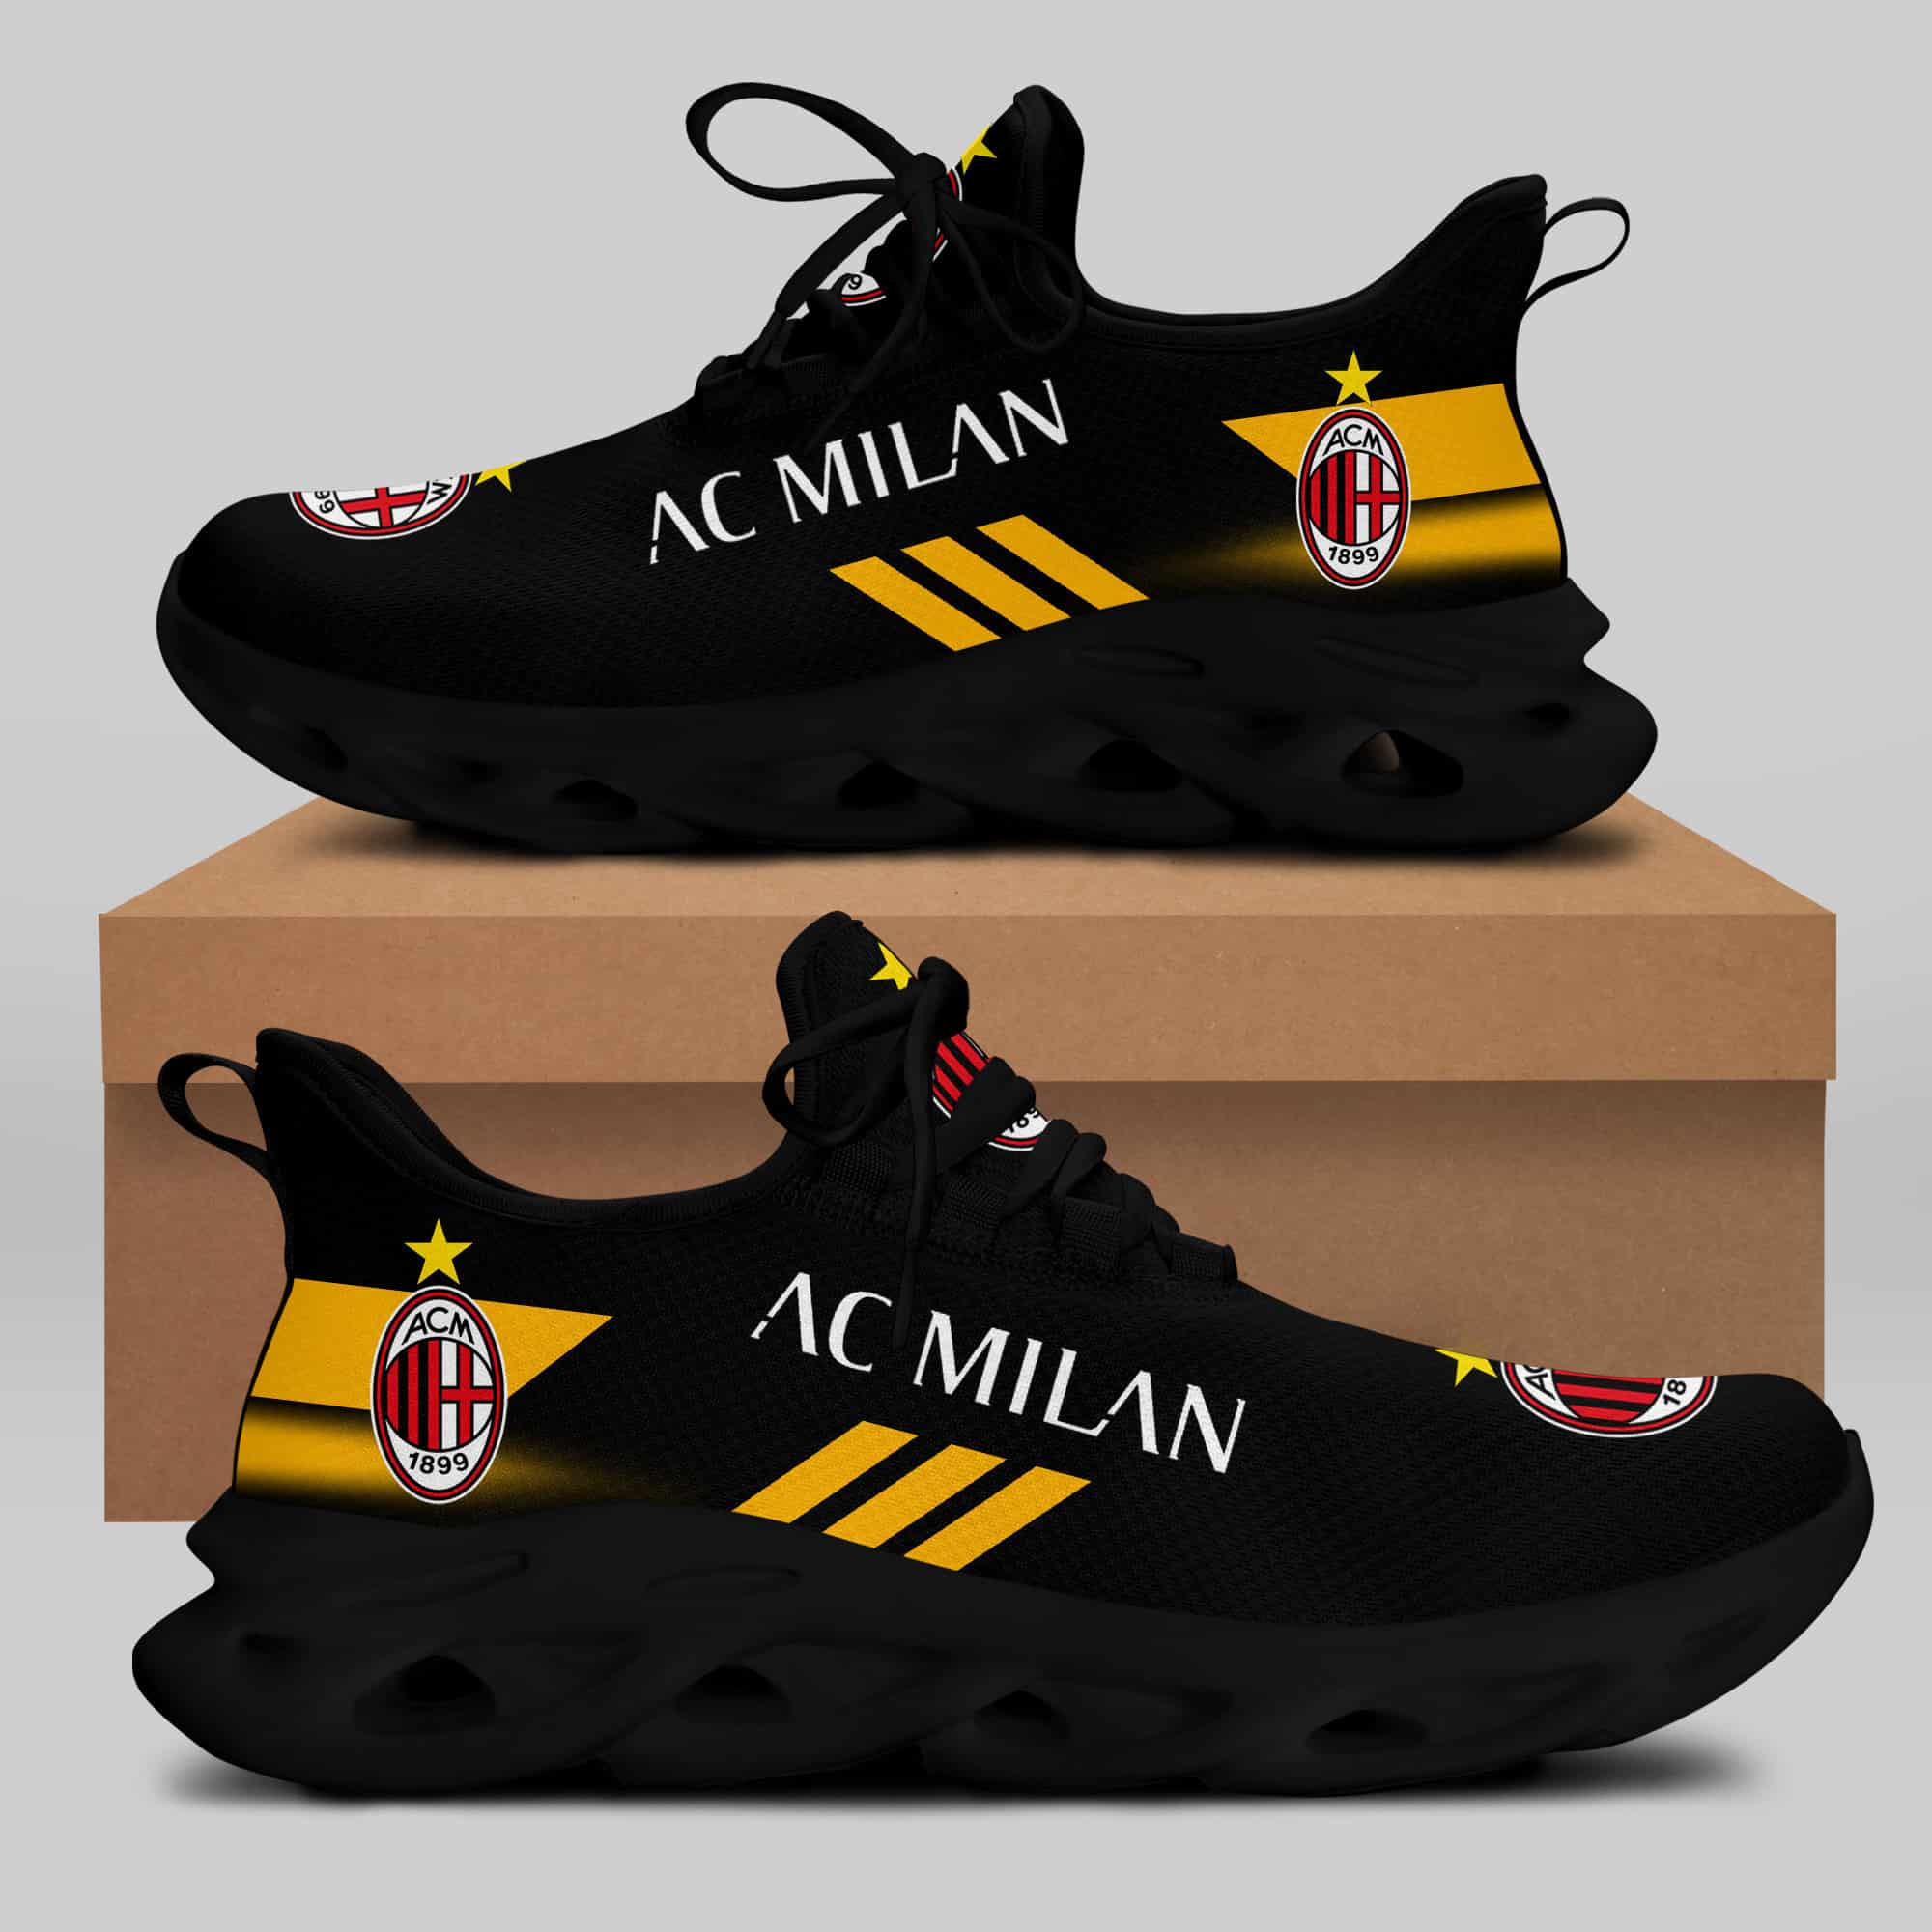 Ac Milan Running Shoes Max Soul Shoes Sneakers Ver 10 1